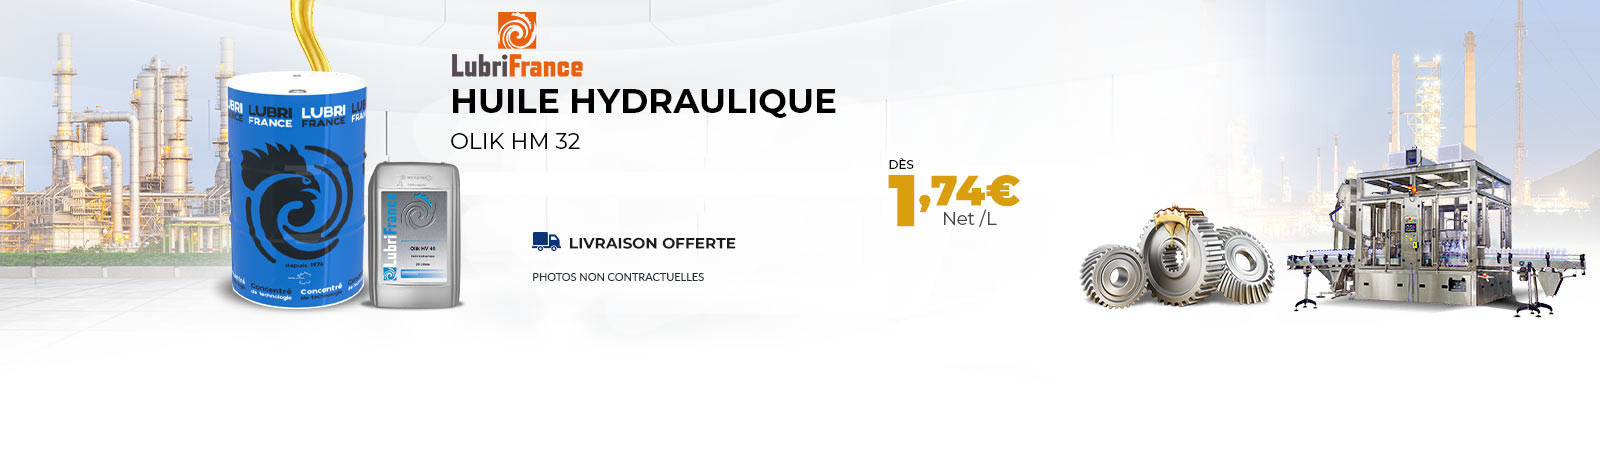 Huile hydraulique LUBRIFRANCE